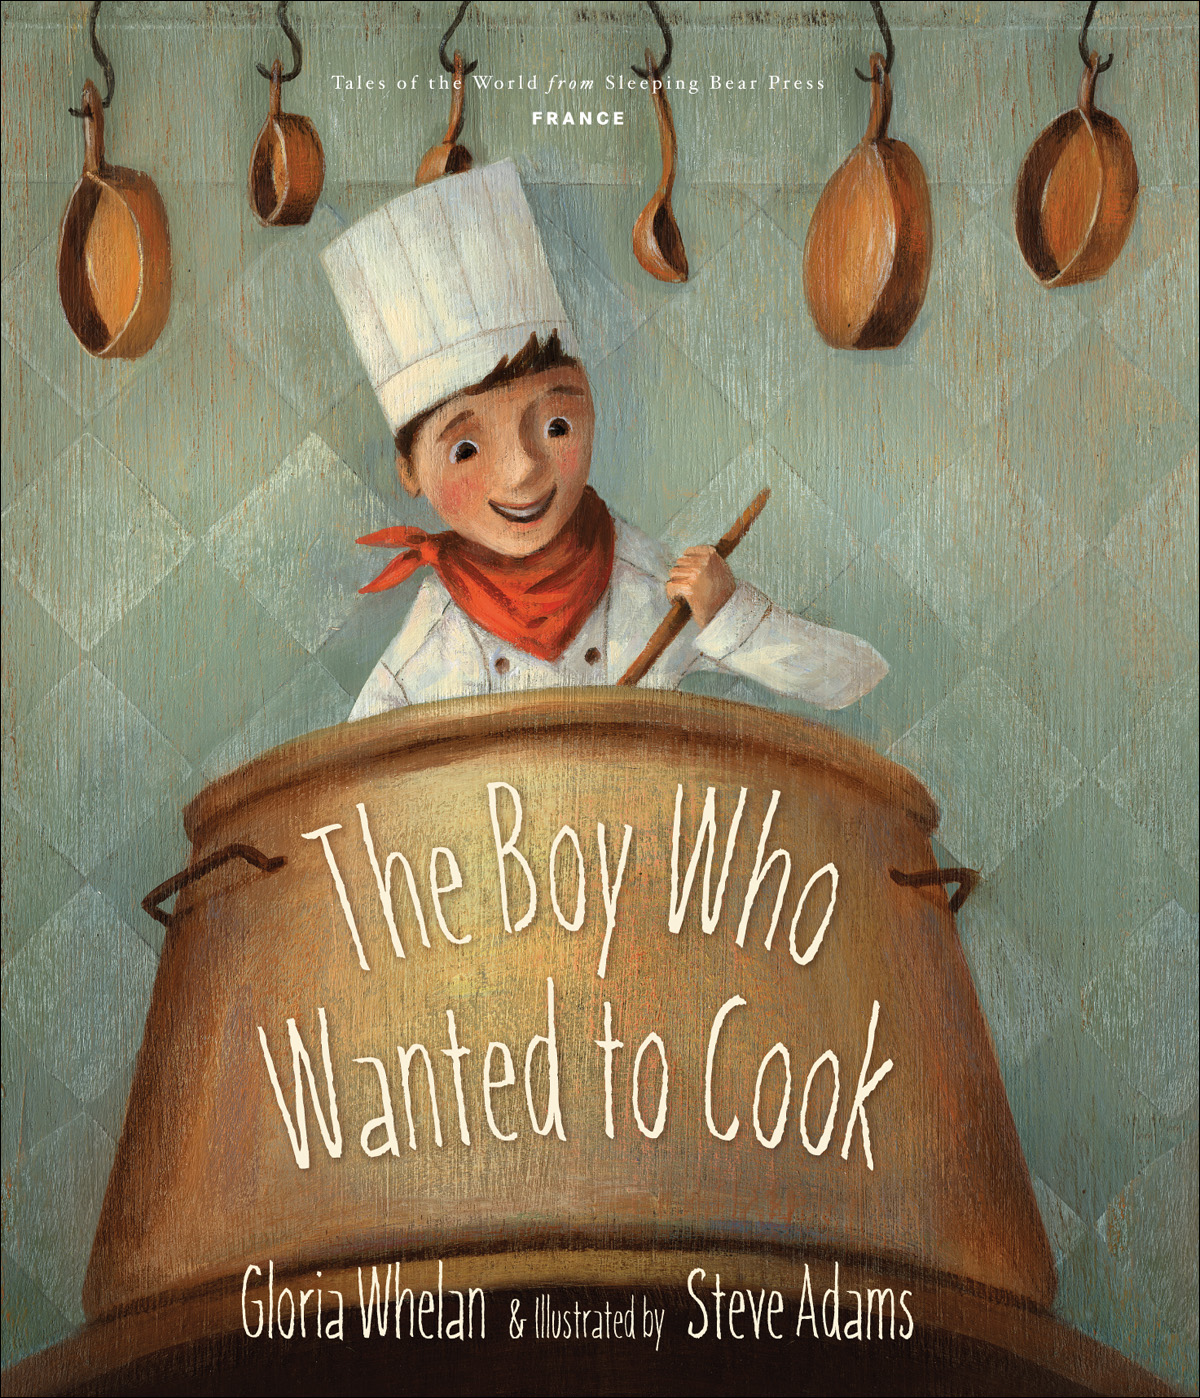 The Boy Who Wanted to Cook (2011)